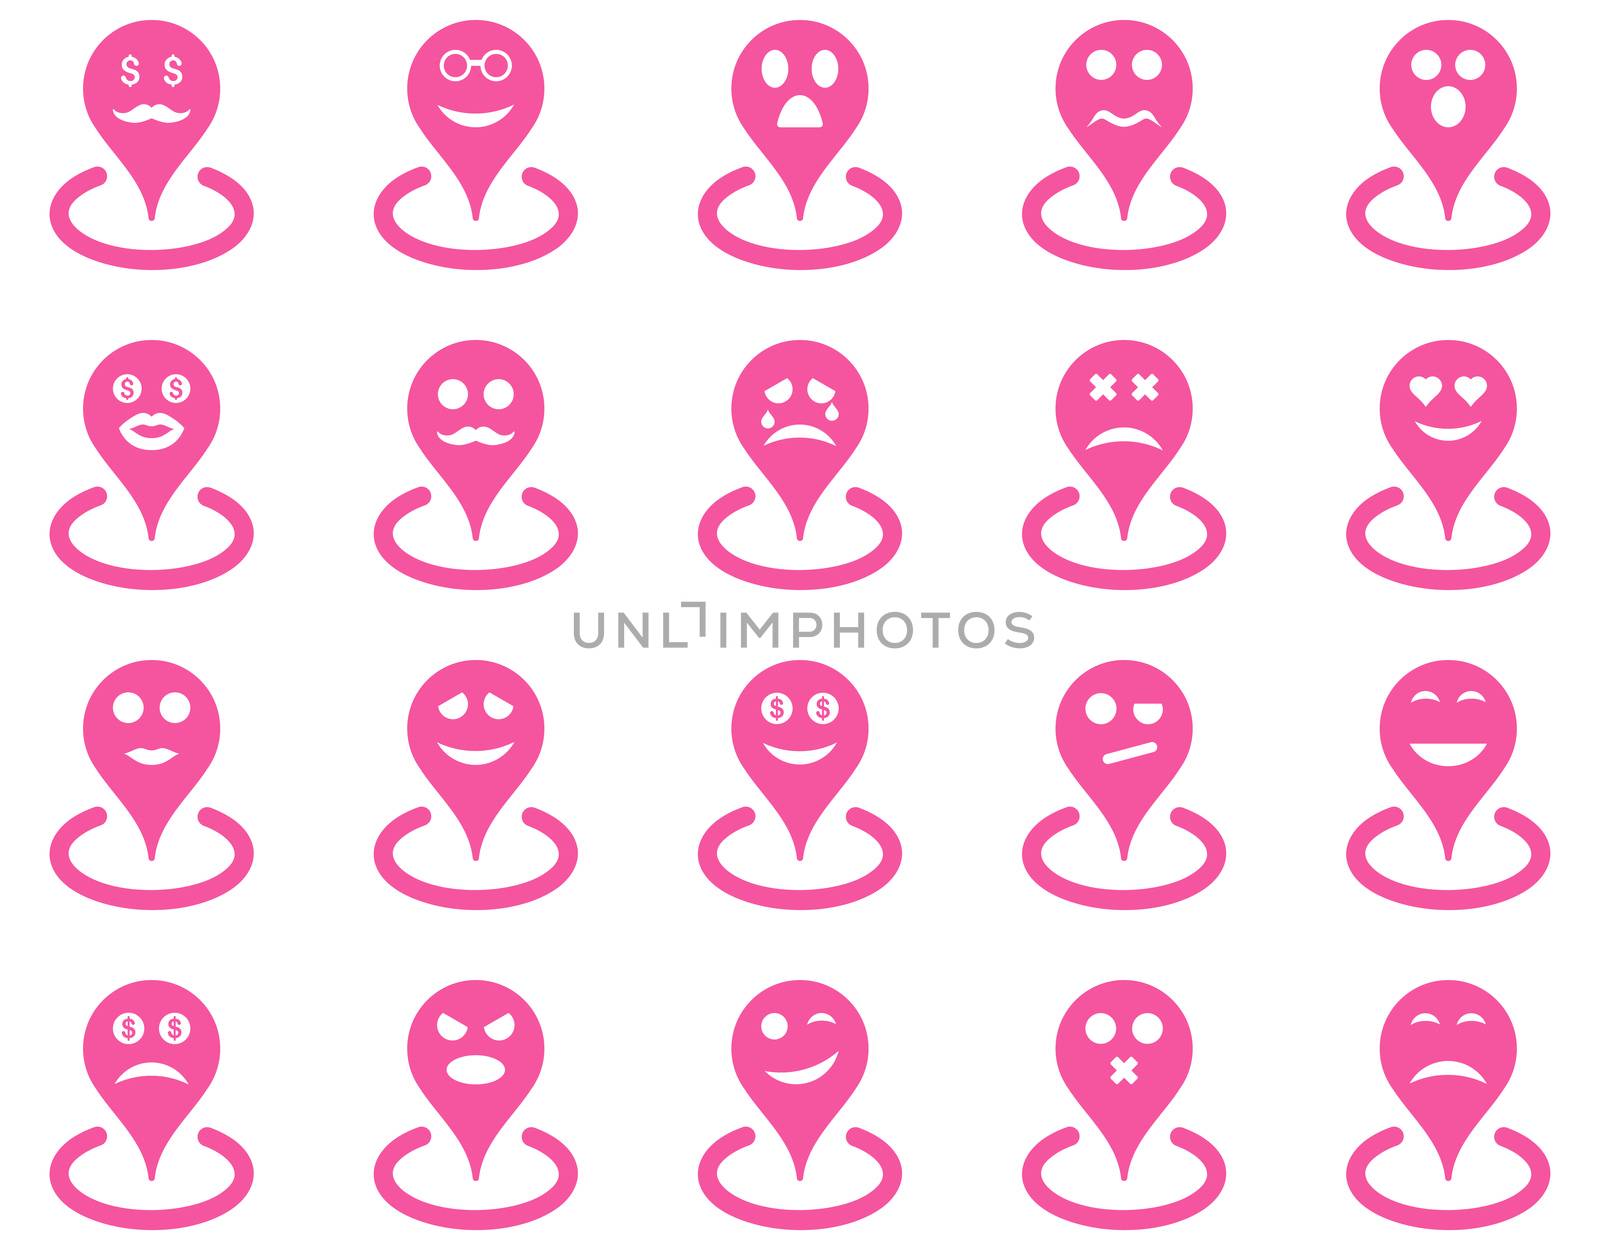 Smiled location icons. Glyph set style is flat images, pink symbols, isolated on a white background.